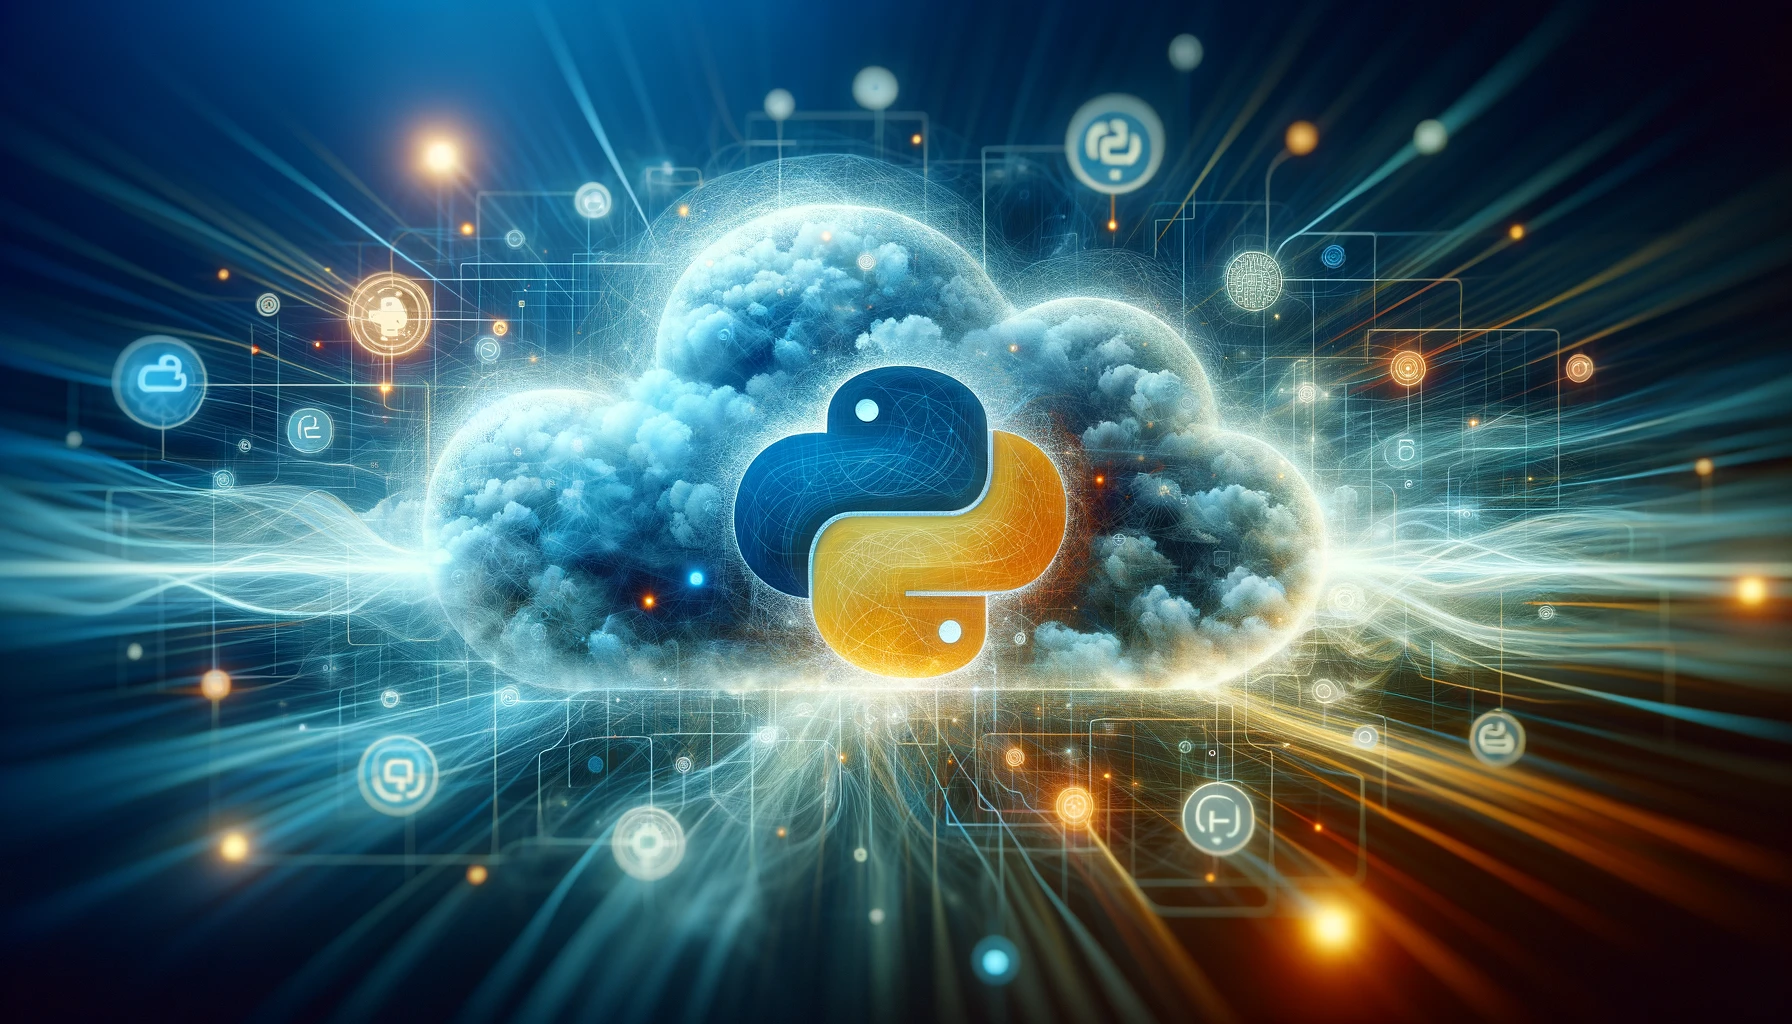 A modern, abstract digital artwork symbolizing cloud computing and automation in Python scripting. The image should feature ethereal, floating clouds interspersed with subtle Python symbols and digital motifs, conveying a sense of advanced technology and innovation. The color palette should be a blend of cool blues and warm oranges, creating a dynamic and engaging visual. The composition should be balanced and suitable for use as a wide featured image, with space for text overlay if needed.